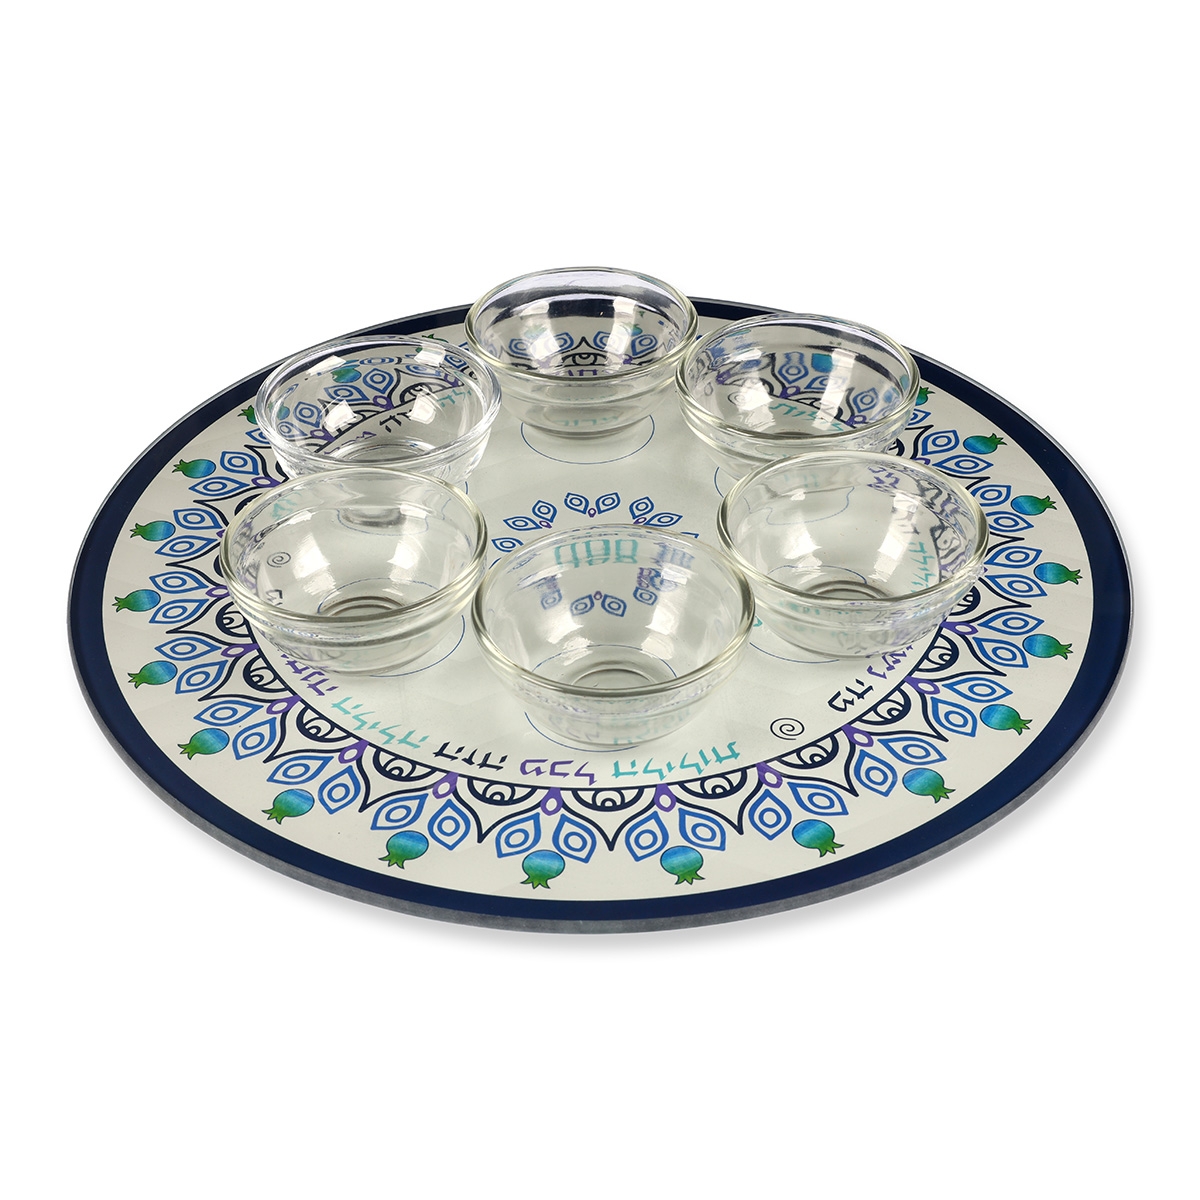 Lily Art Glass Seder Plate with Pomegranate Motif in Blue  - 1